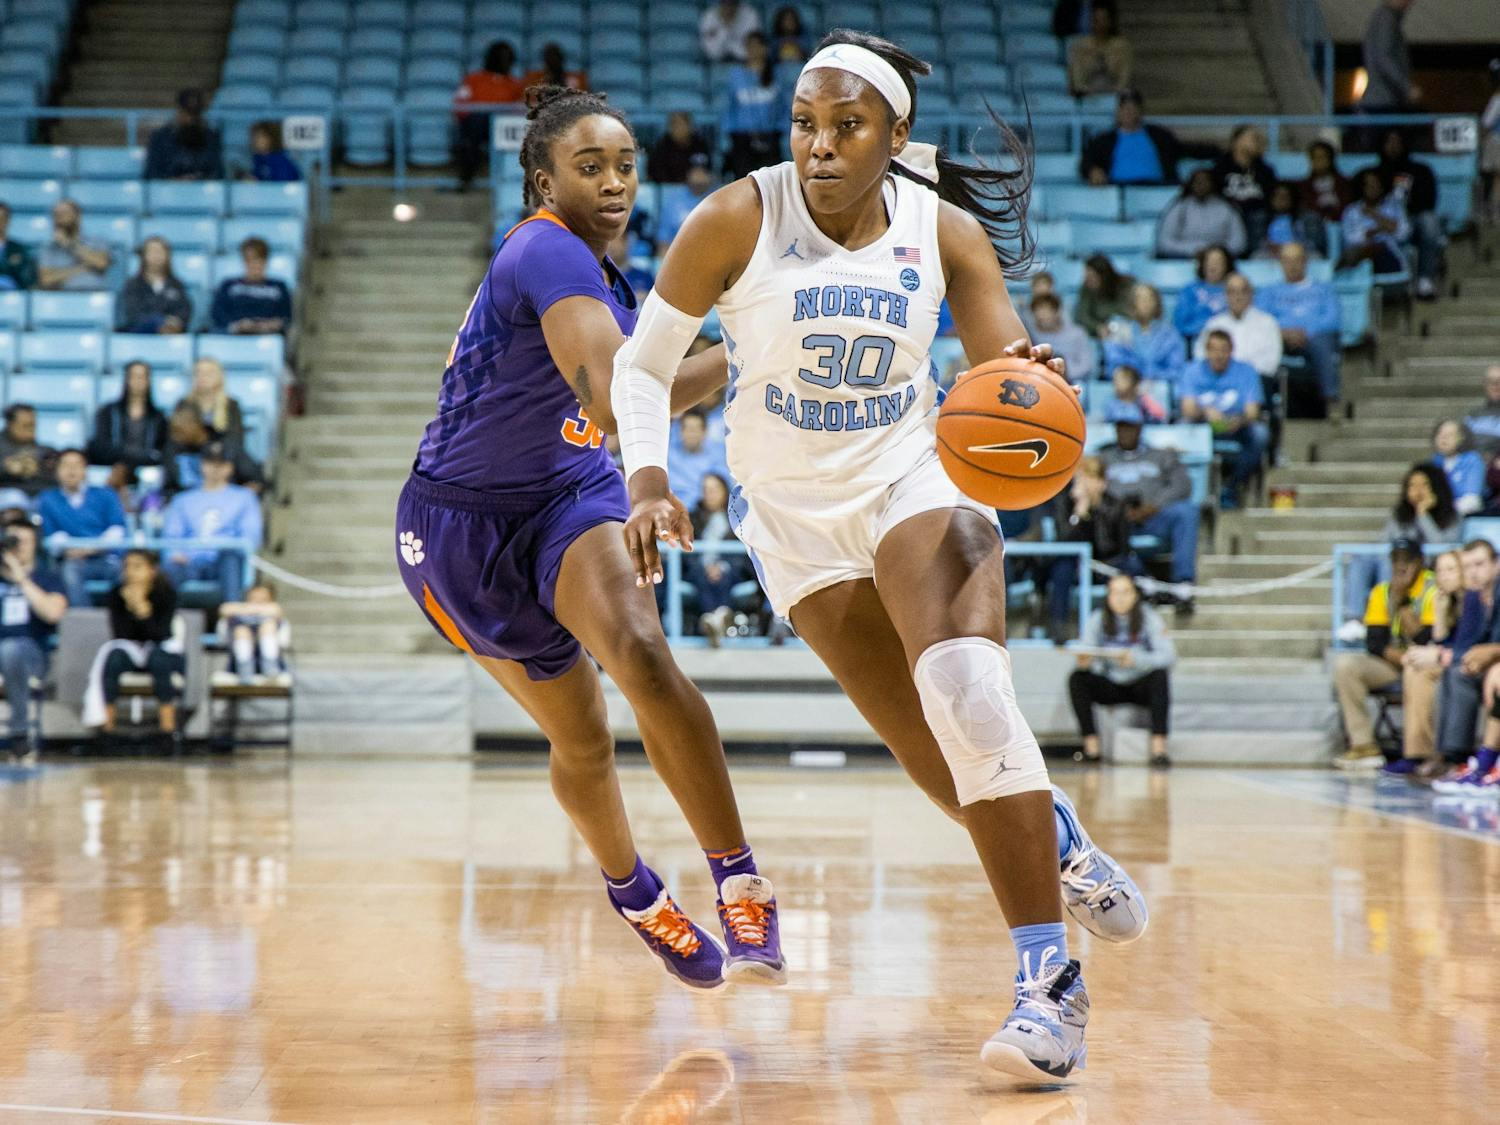 UNC junior center Janelle Bailey (30) dribbles past Clemson University senior guard Chyna Cotton (32). The Tar Heels beat the Tigers 86-72 on Sunday, Feb. 2, 2020 in Carmichael Arena.